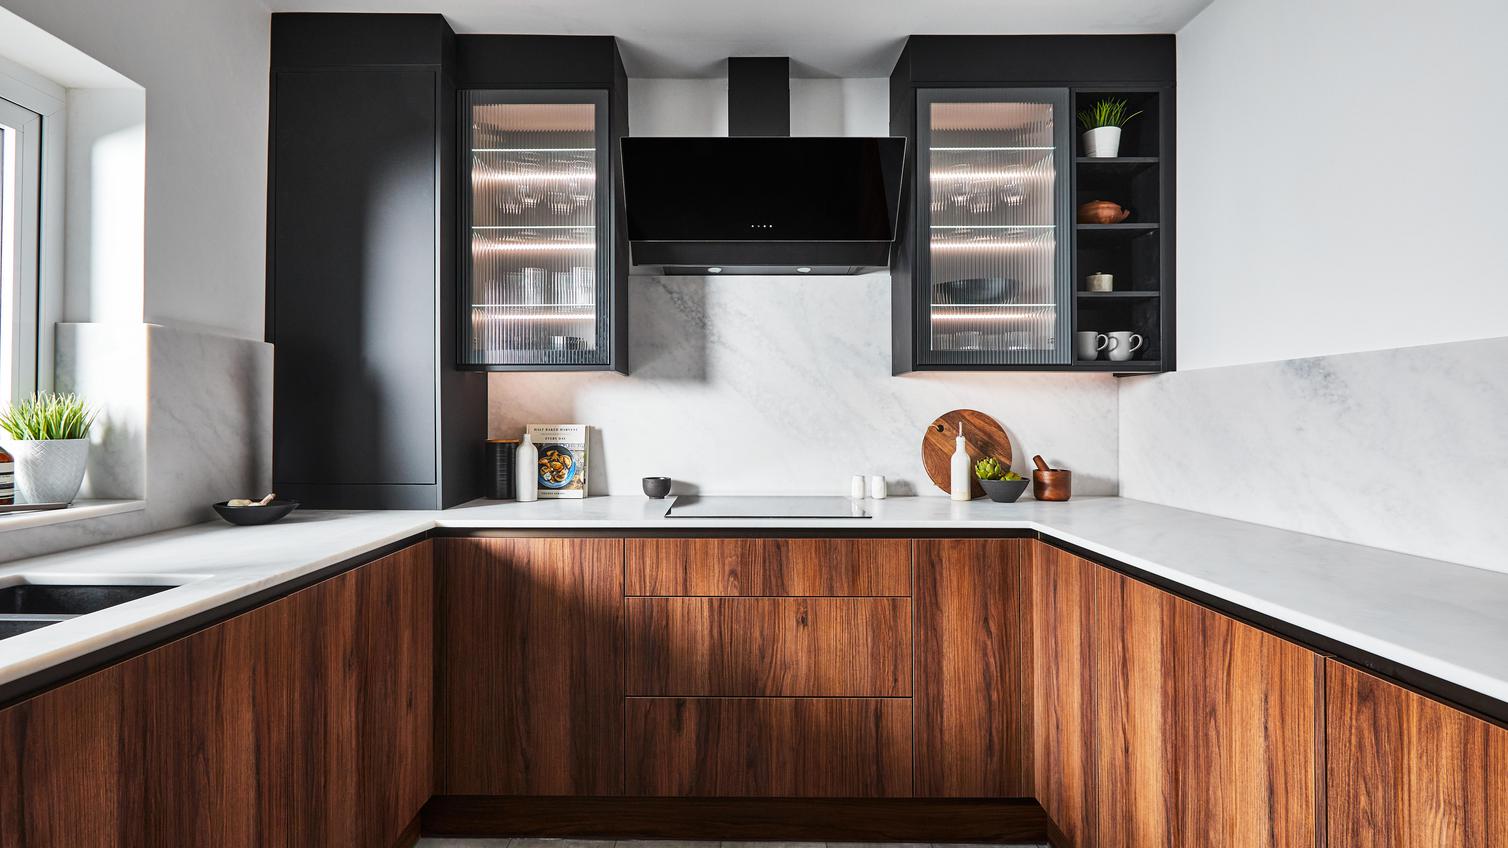 A modern luxury kitchen featuring walnut and black cupboards doors in a slab style. The kitchen also contains white worktops.